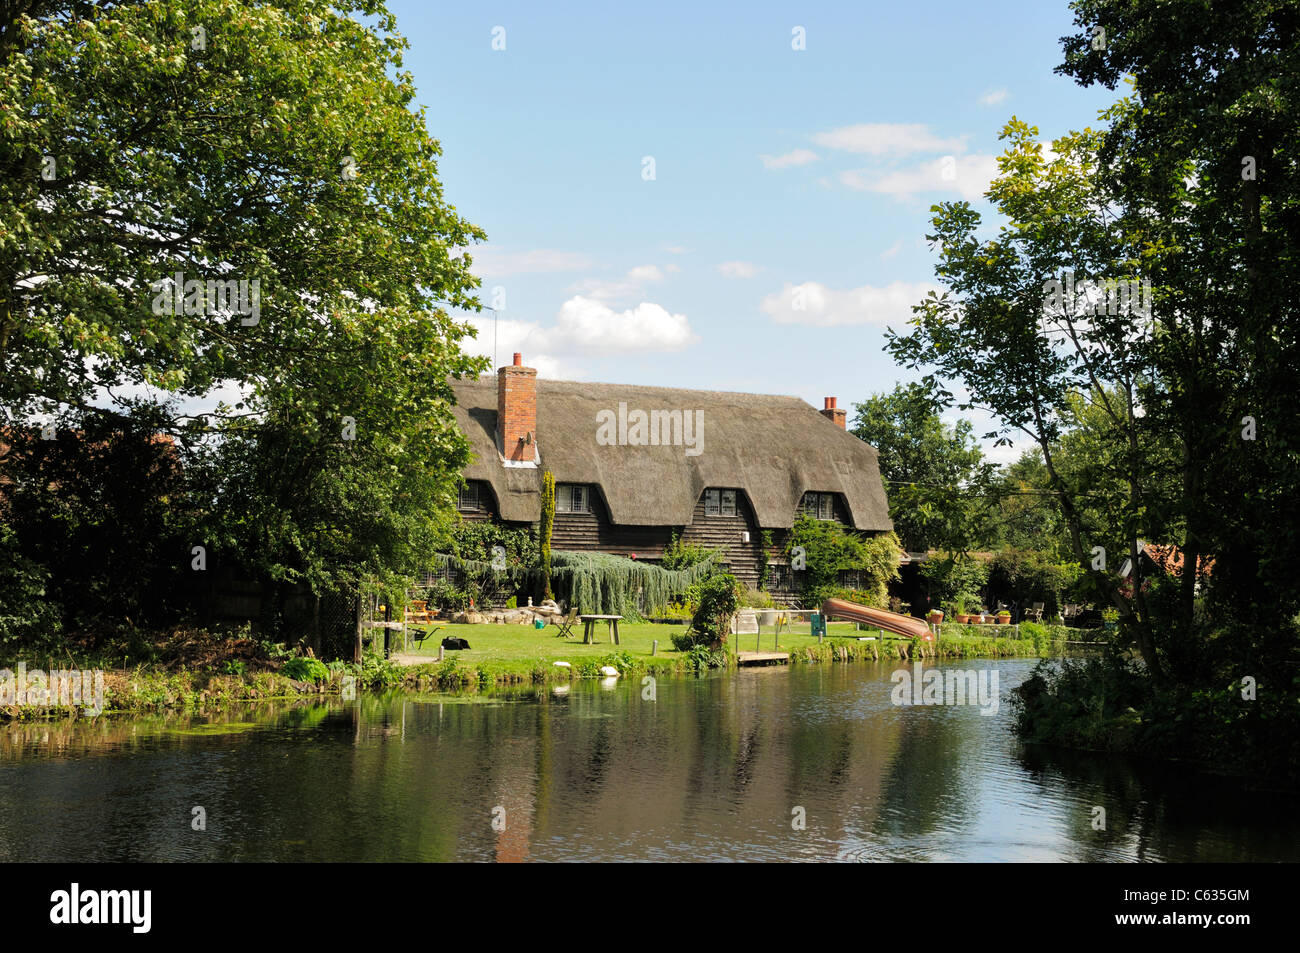 A large thatched cottage next to a river bank at Flatford on the border of Suffolk and Essex, England. Stock Photo